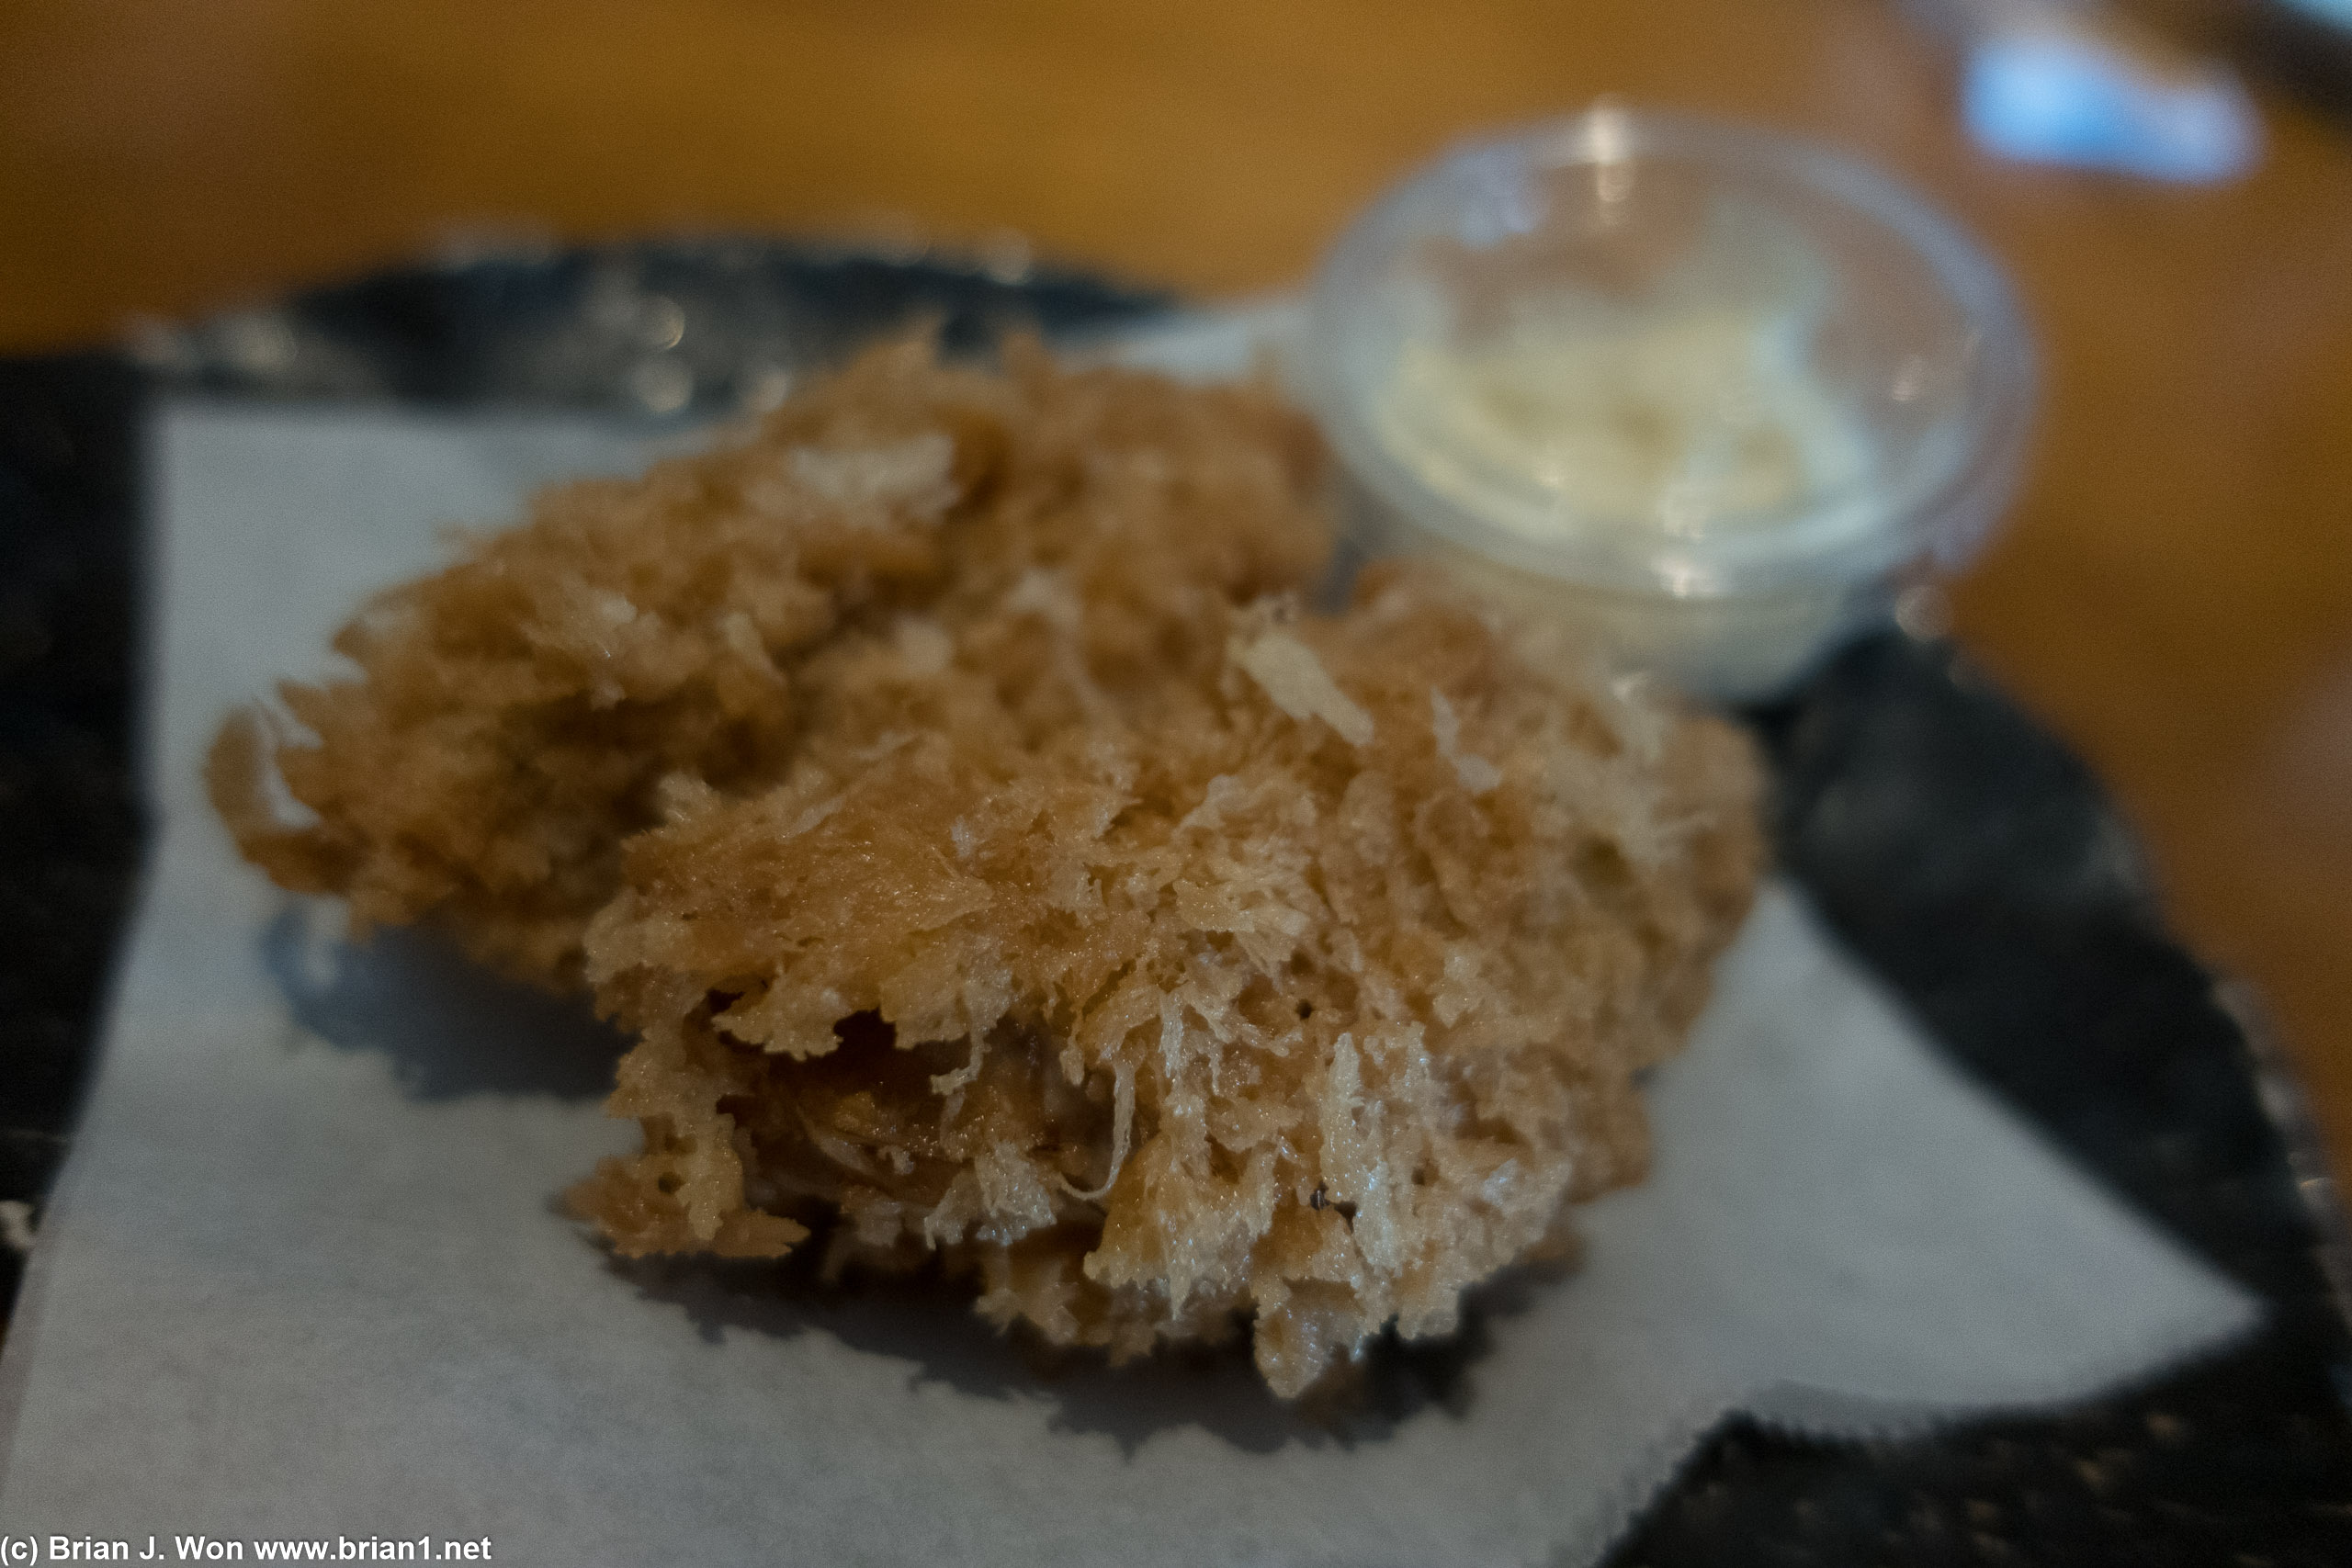 Deep fried oysters were quite good.